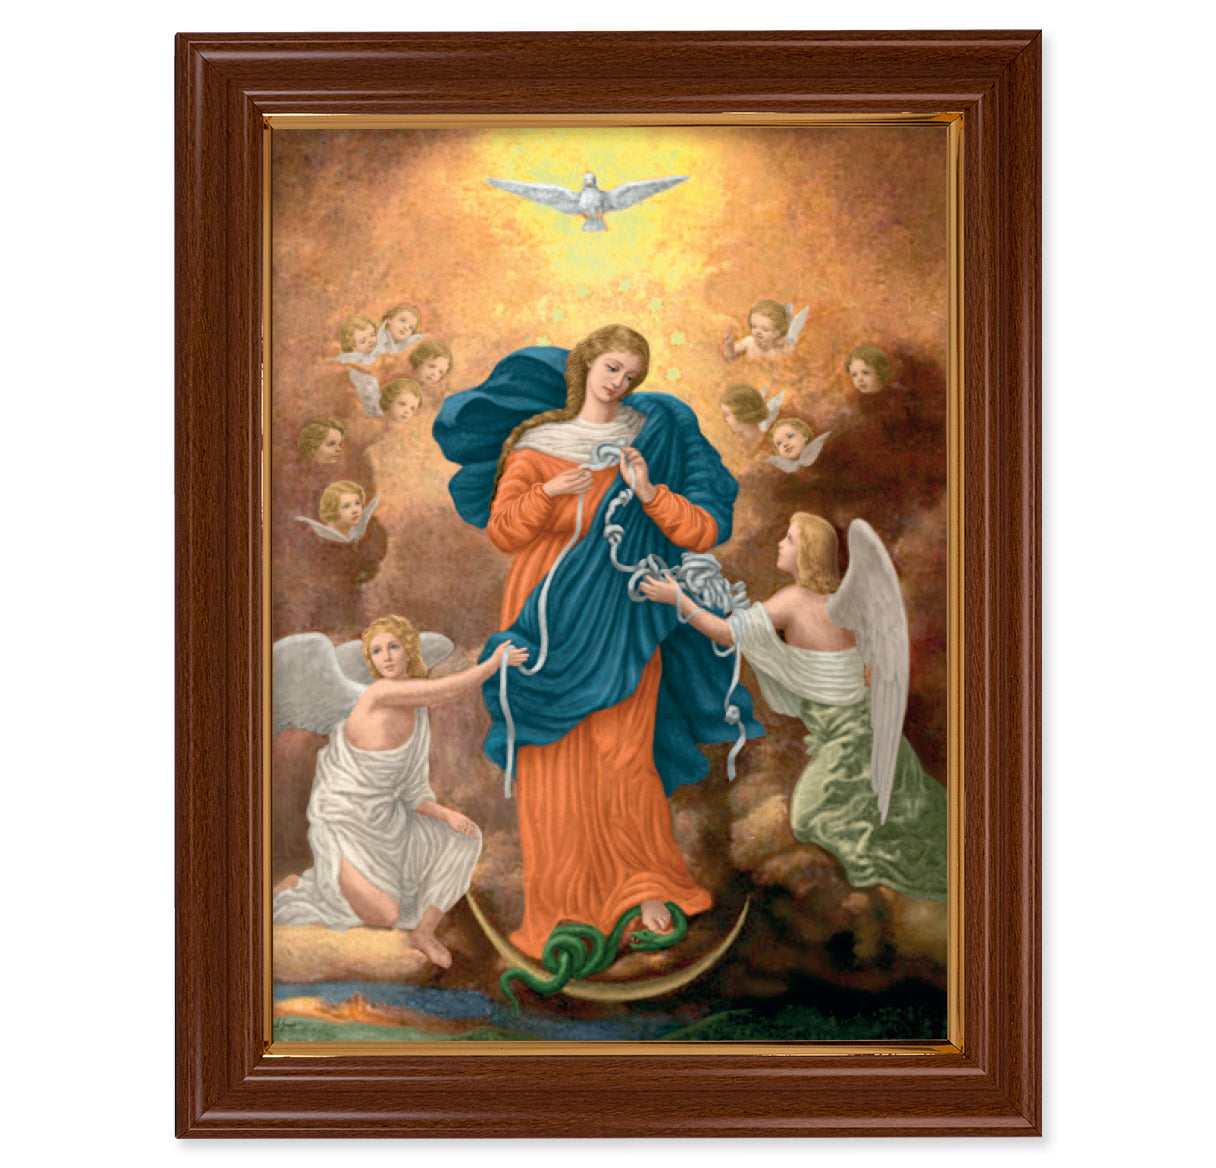 Our Lady Untier of Knots Walnut Finish Framed Art